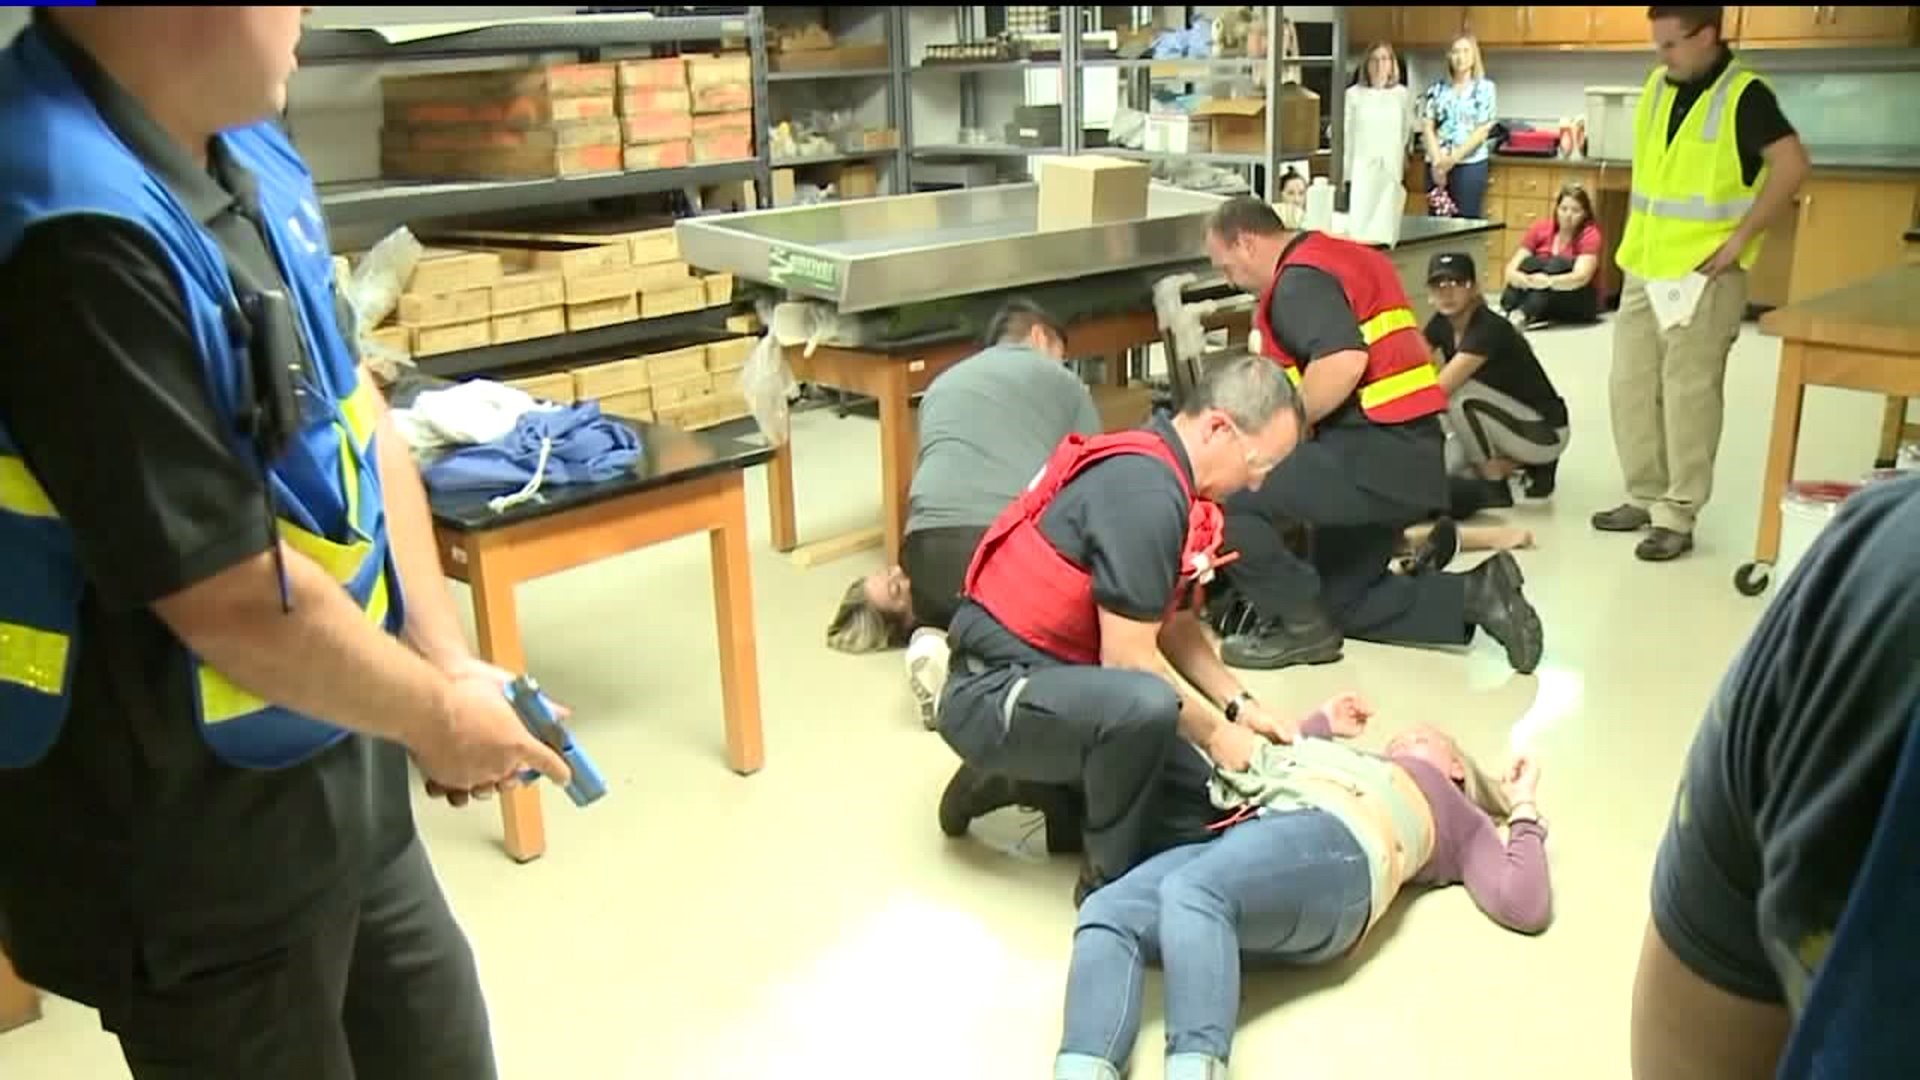 Law Enforcement and Emergency Responders Train Together